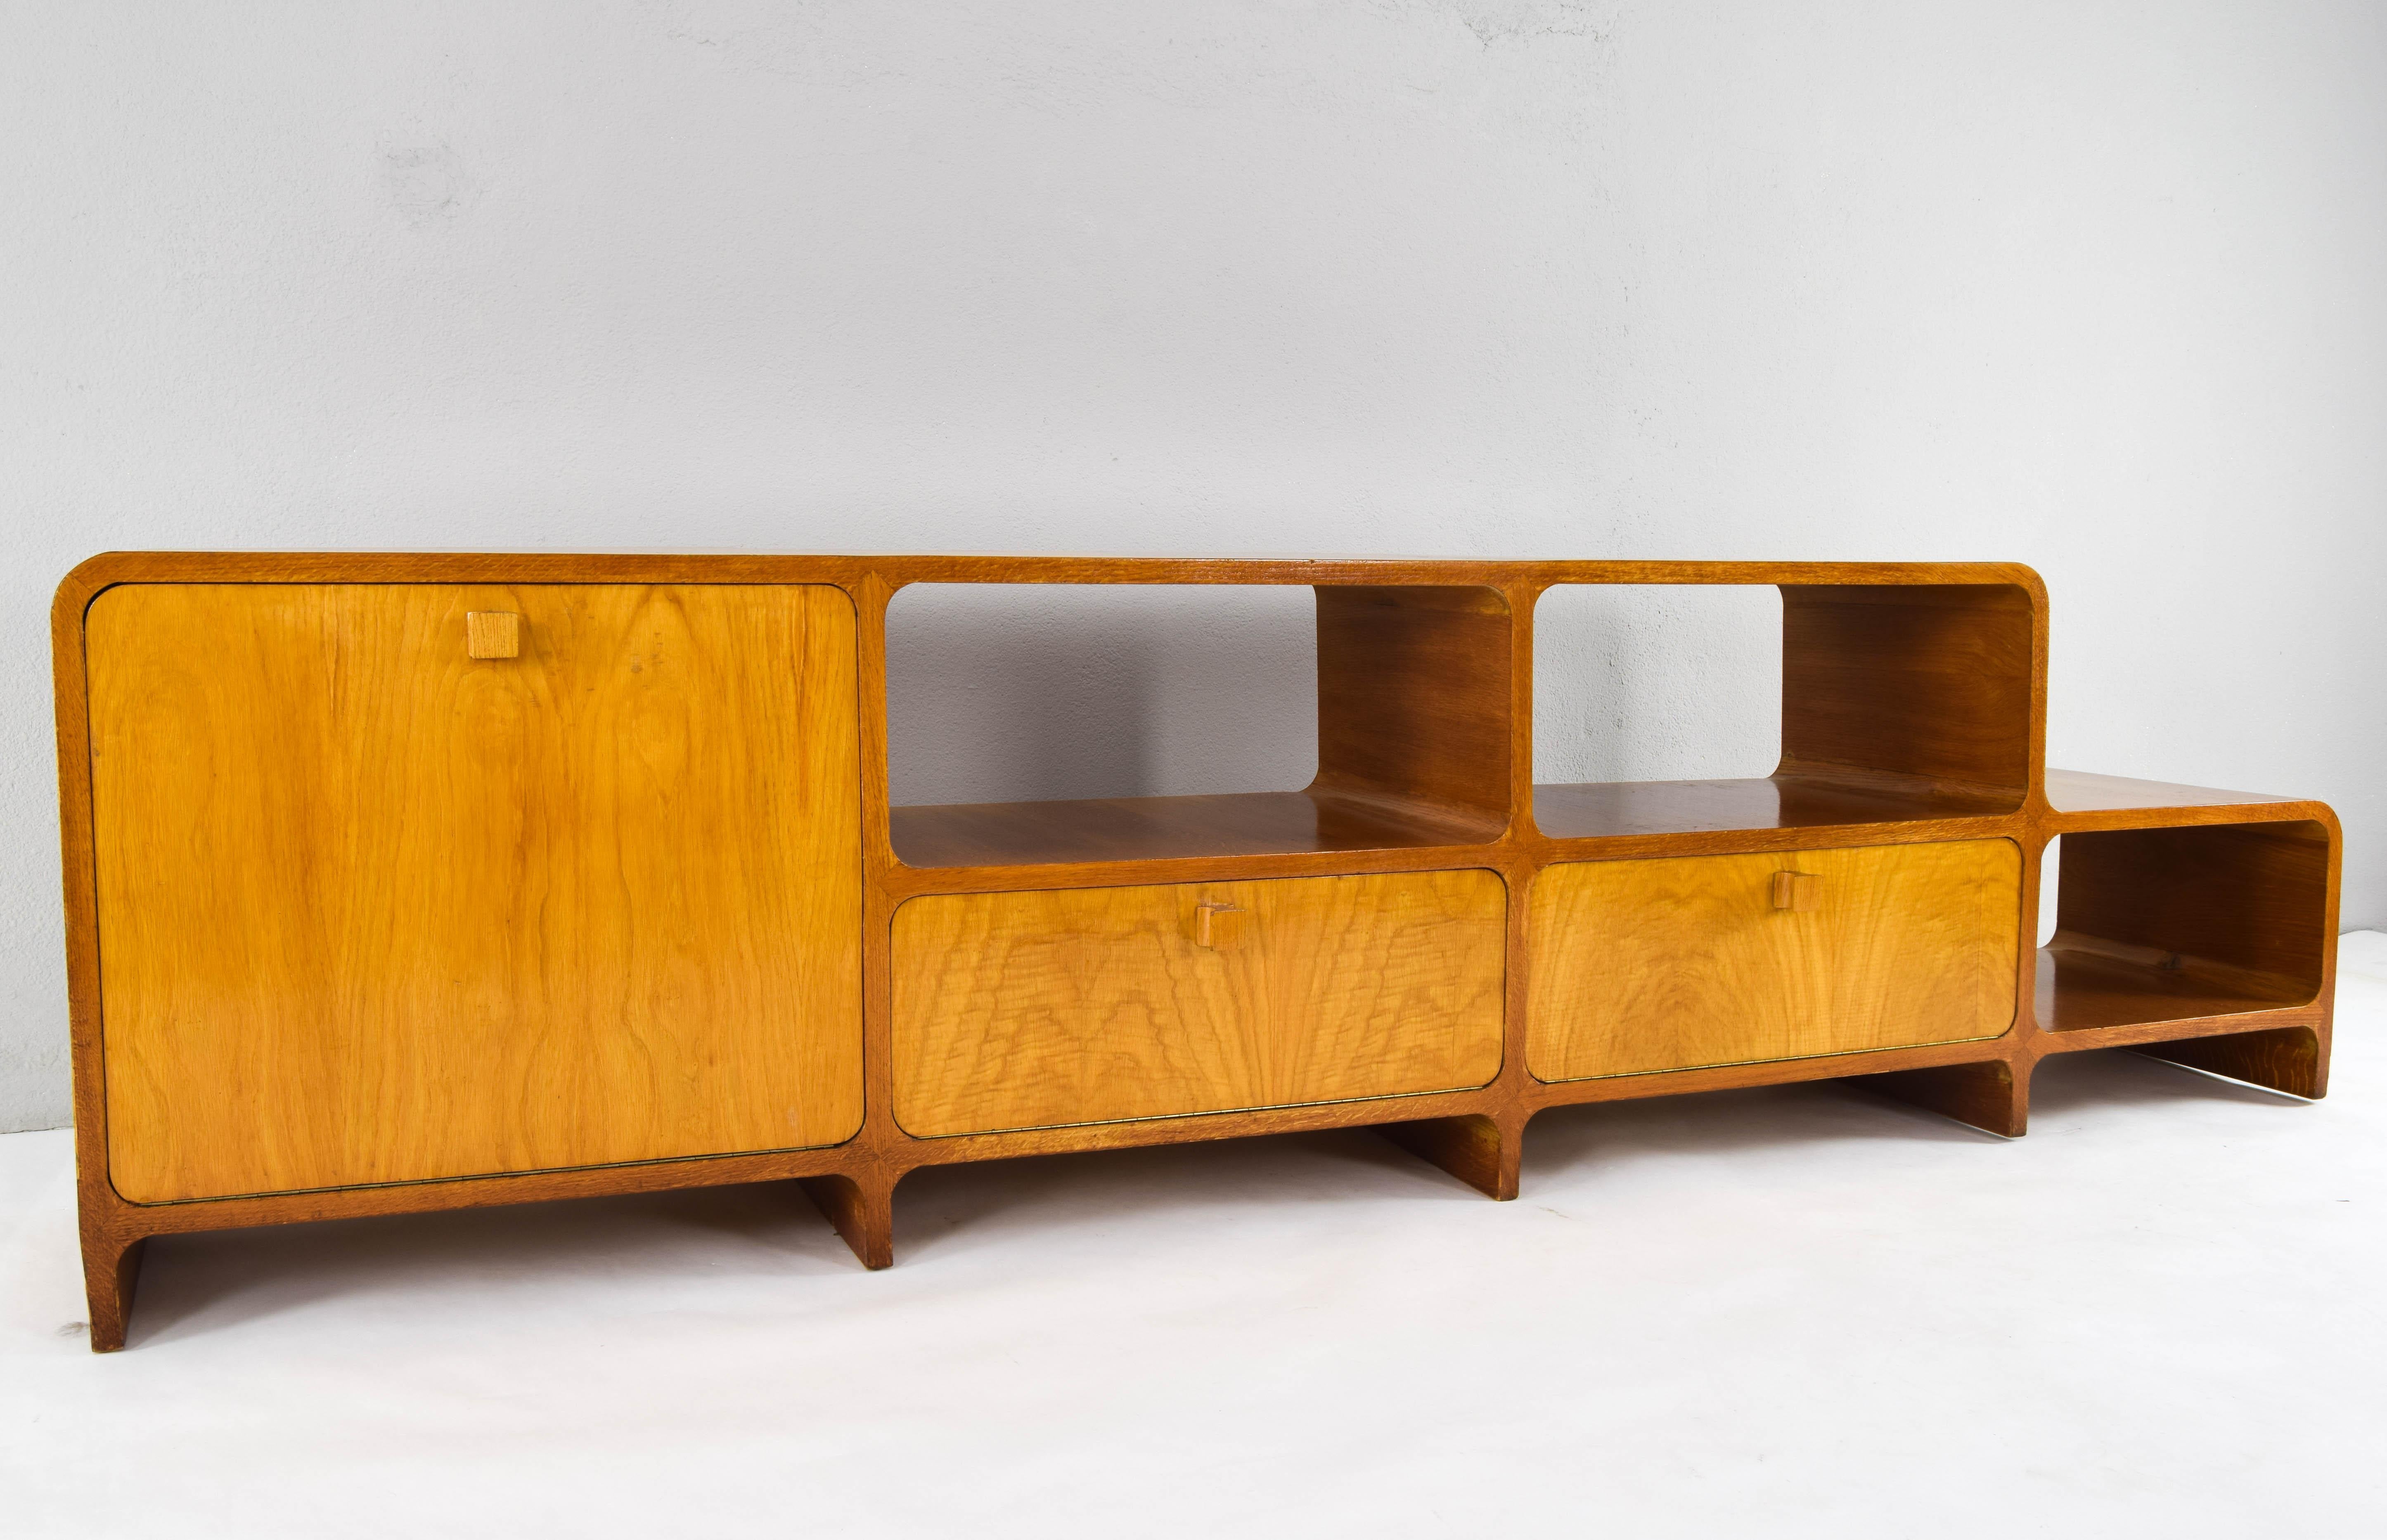 Acrylic Large Curved Midcentury Danish Modern Teak Double Sided Space Divider Sideboard